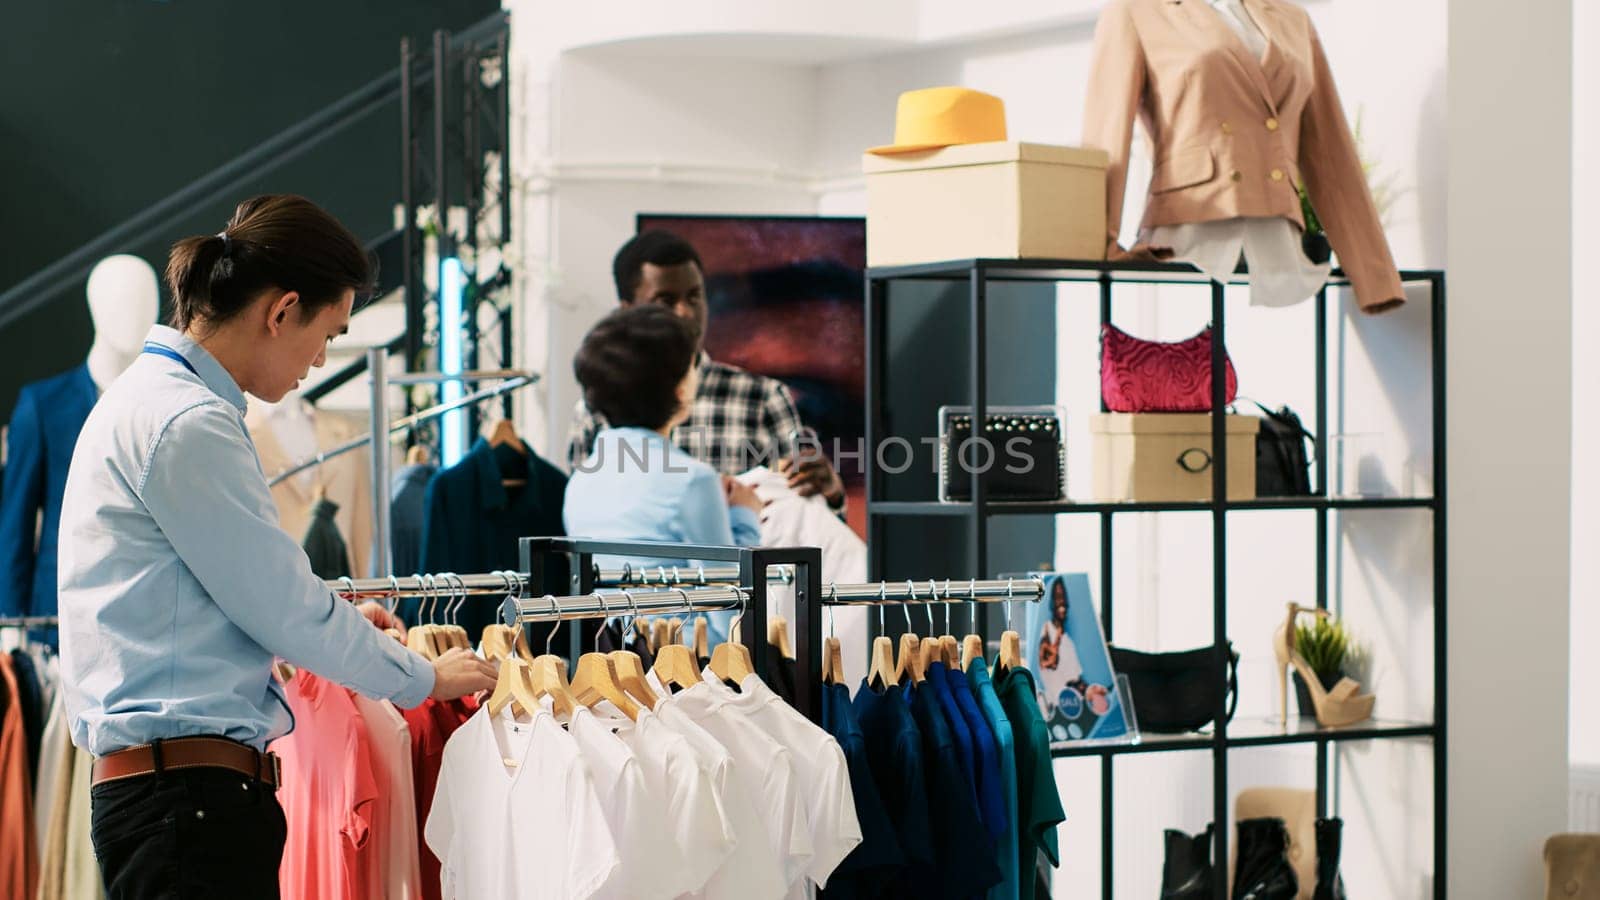 African american customer asking worker for help in modern boutique, shopping for stylish merchandise. Asian employee arranging hangers with fashionable clothes in clothing store. Fashion concept